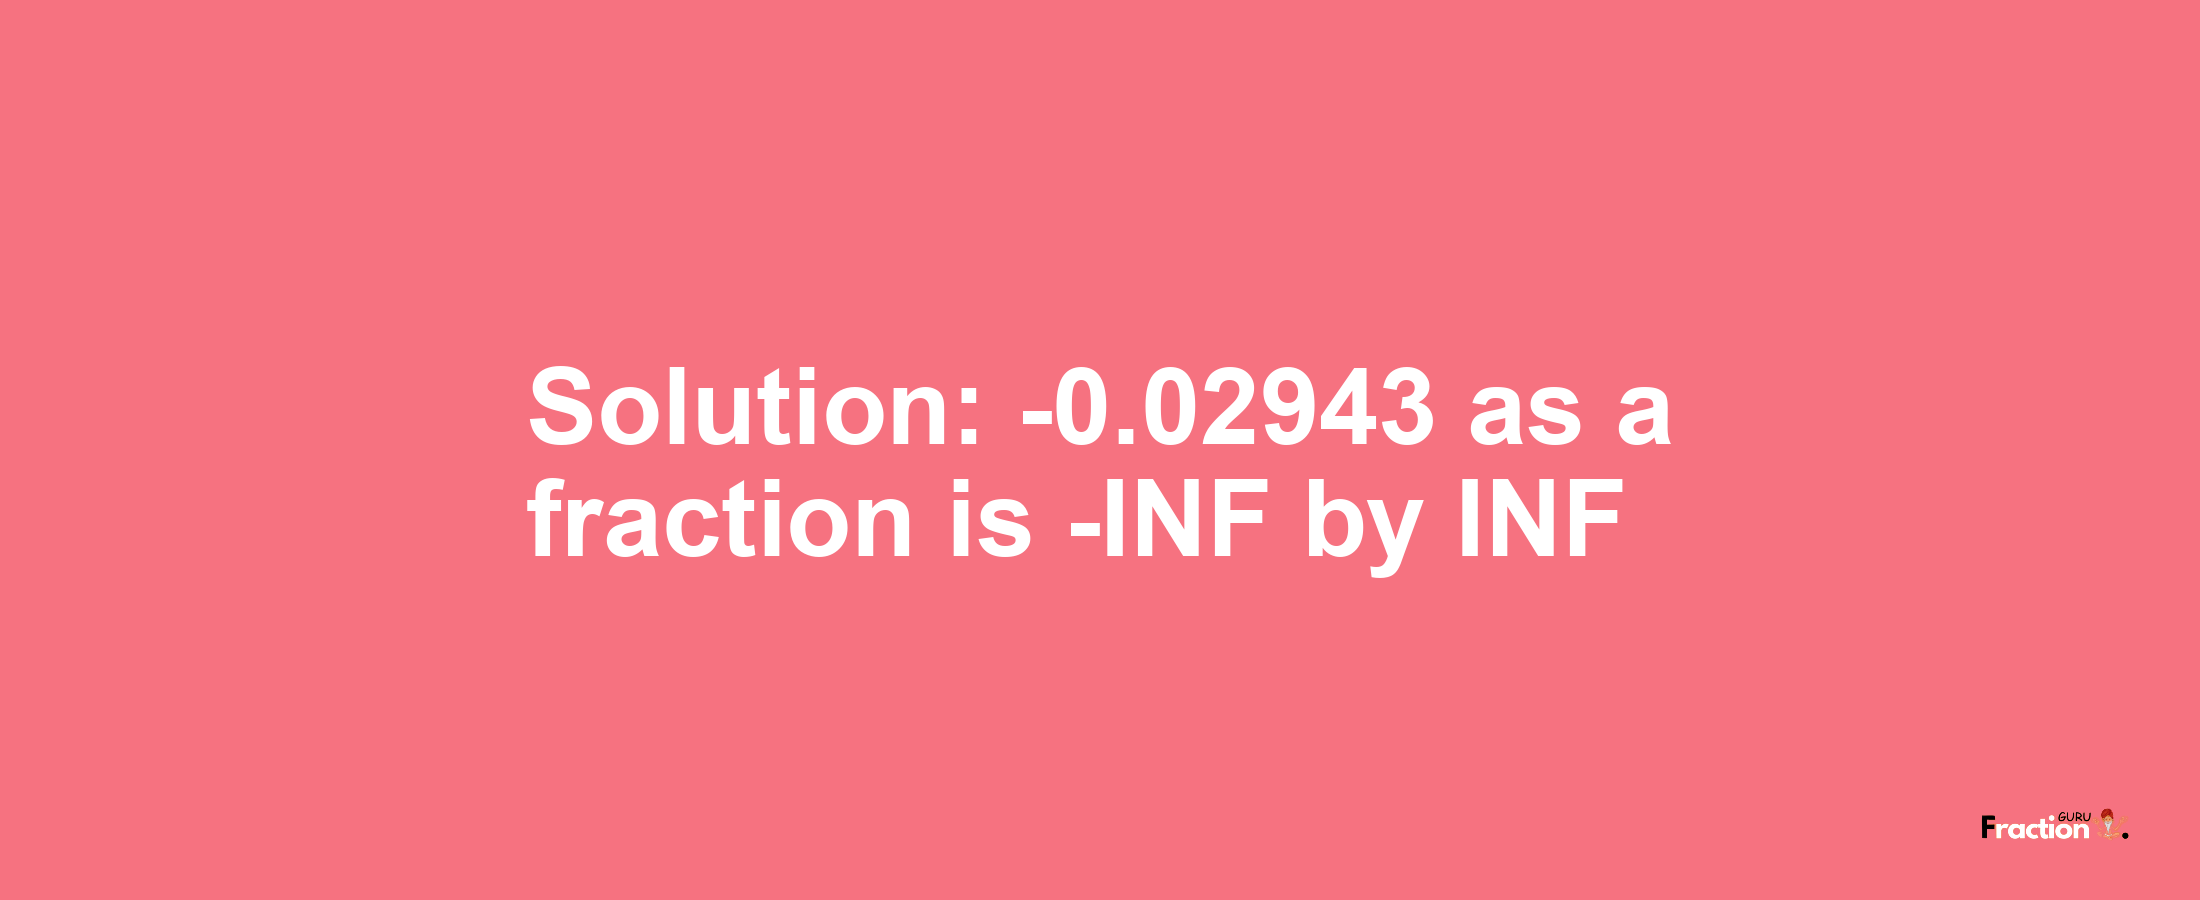 Solution:-0.02943 as a fraction is -INF/INF